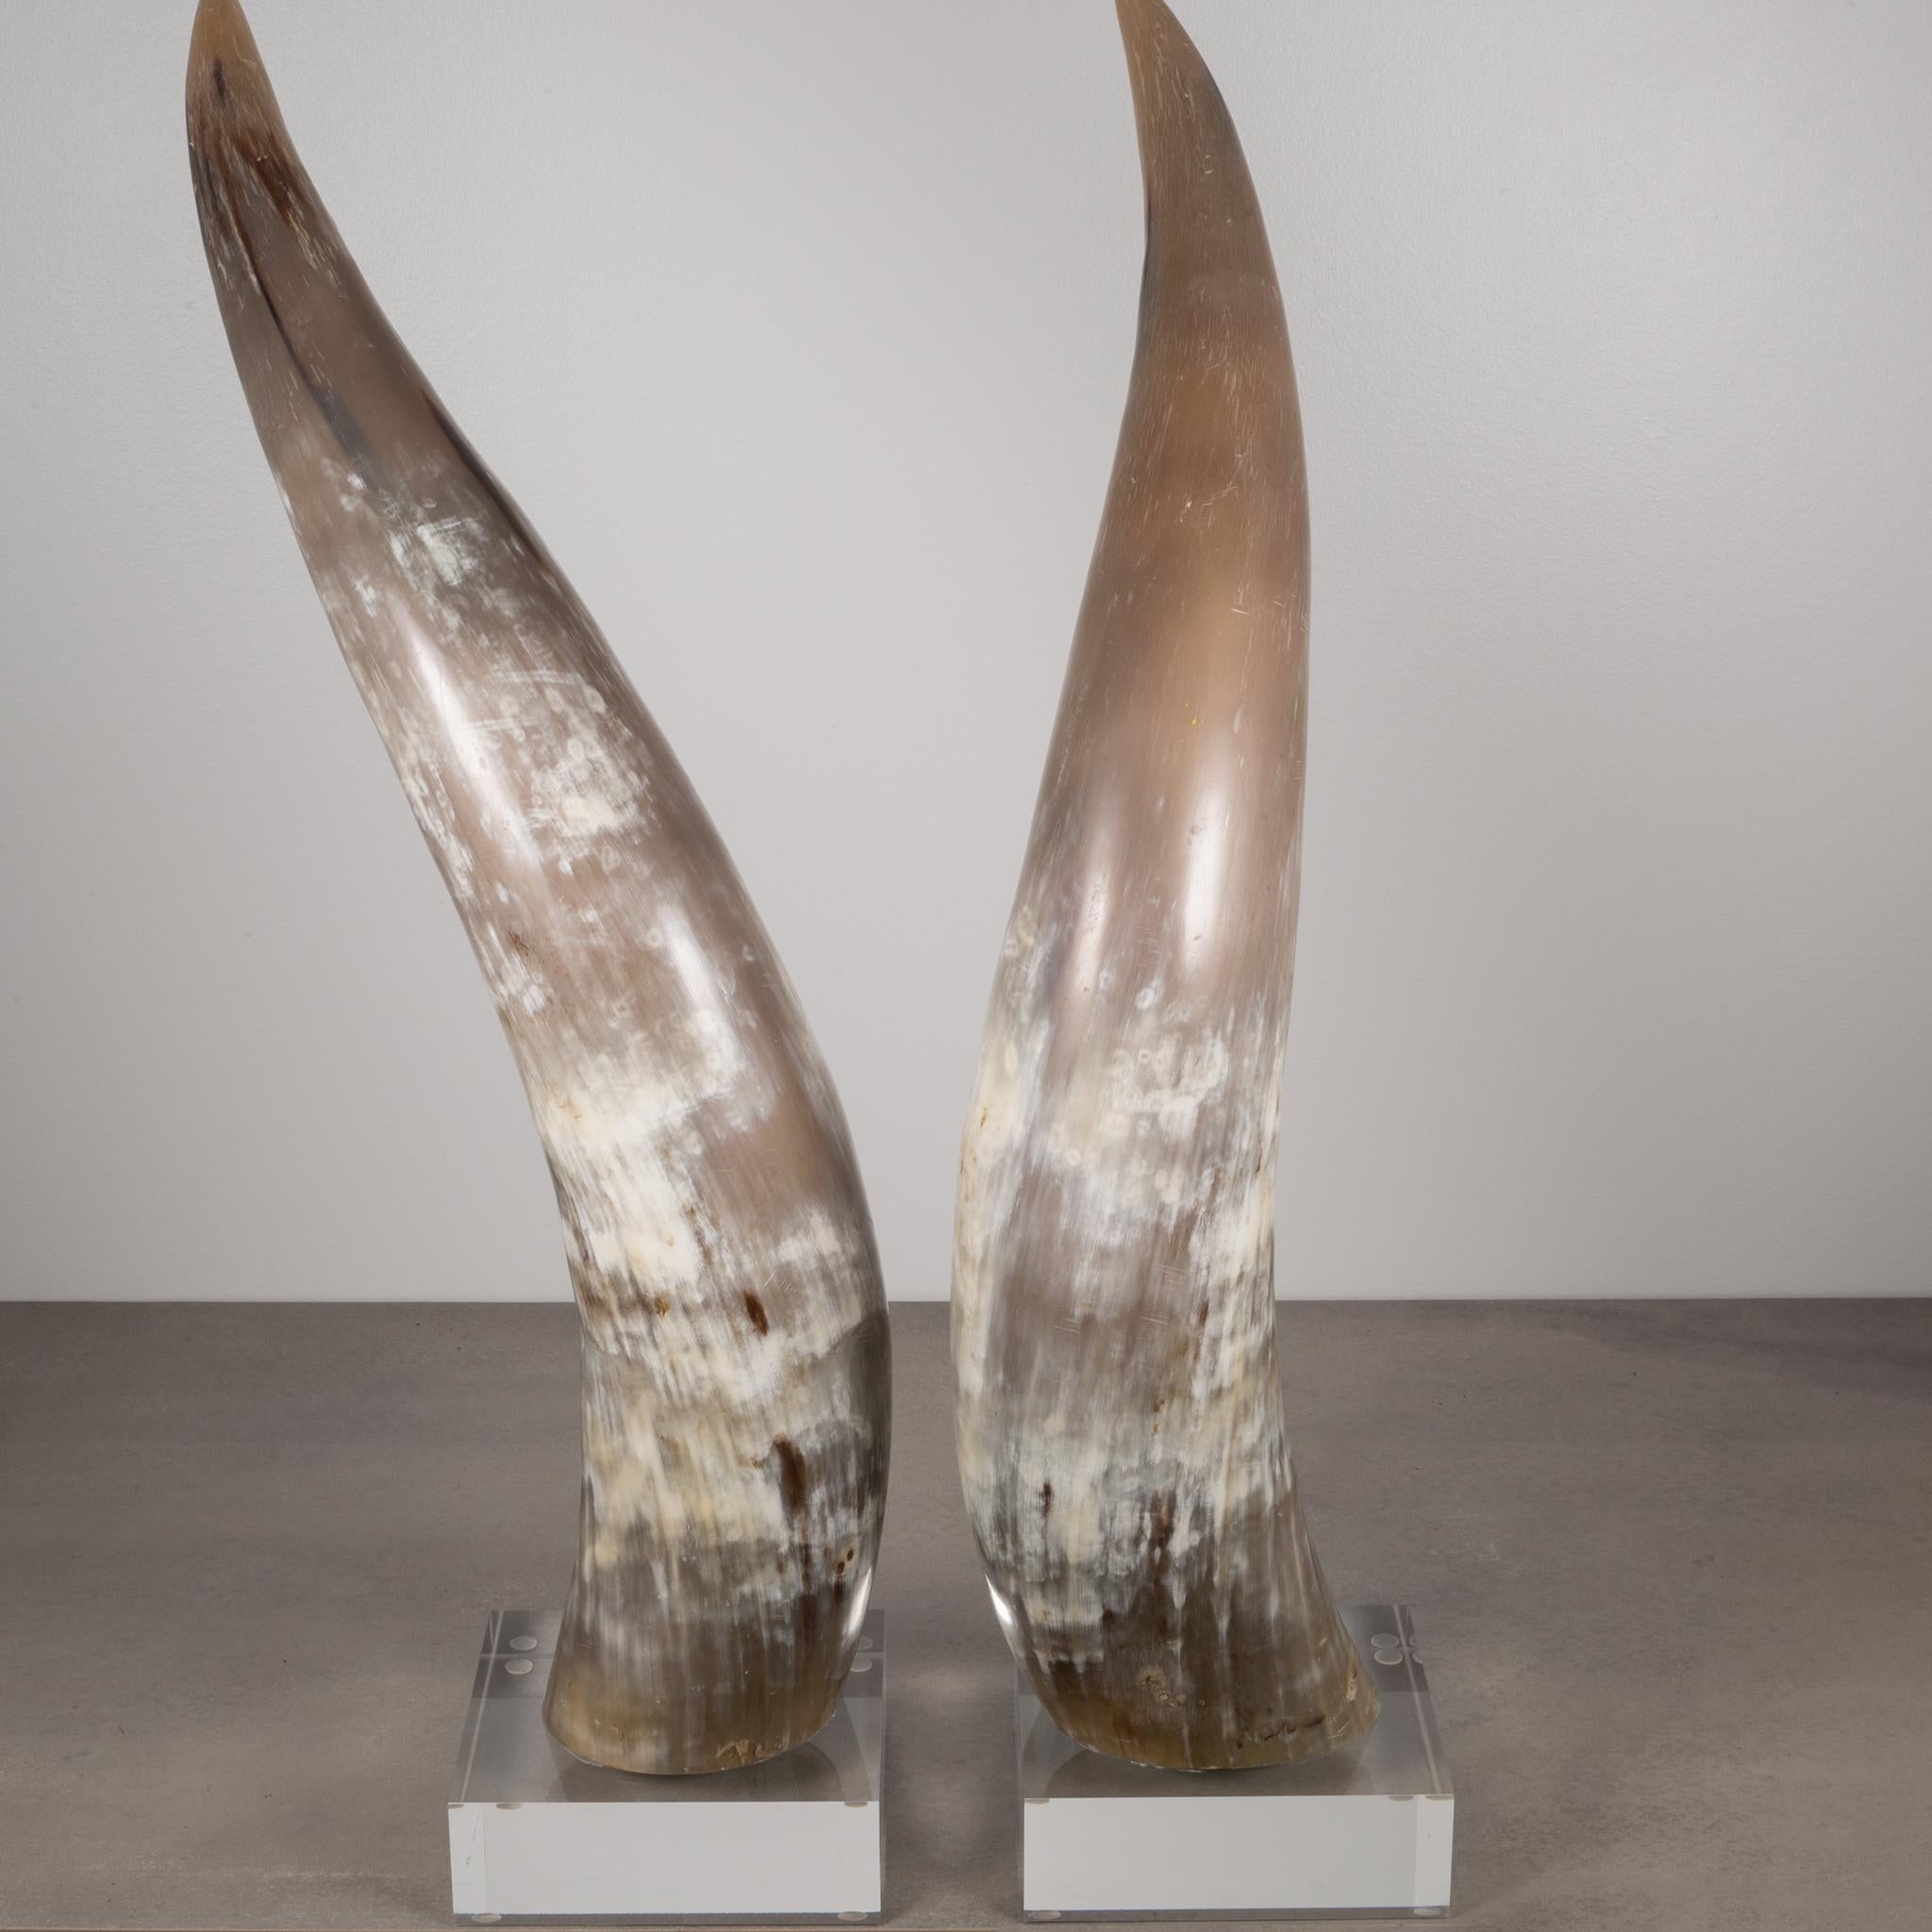 About

This an original pair of custom made Texas Longhorn cattle horns mounted on thick acrylic blocks. These grey, white and tan horns measure 25